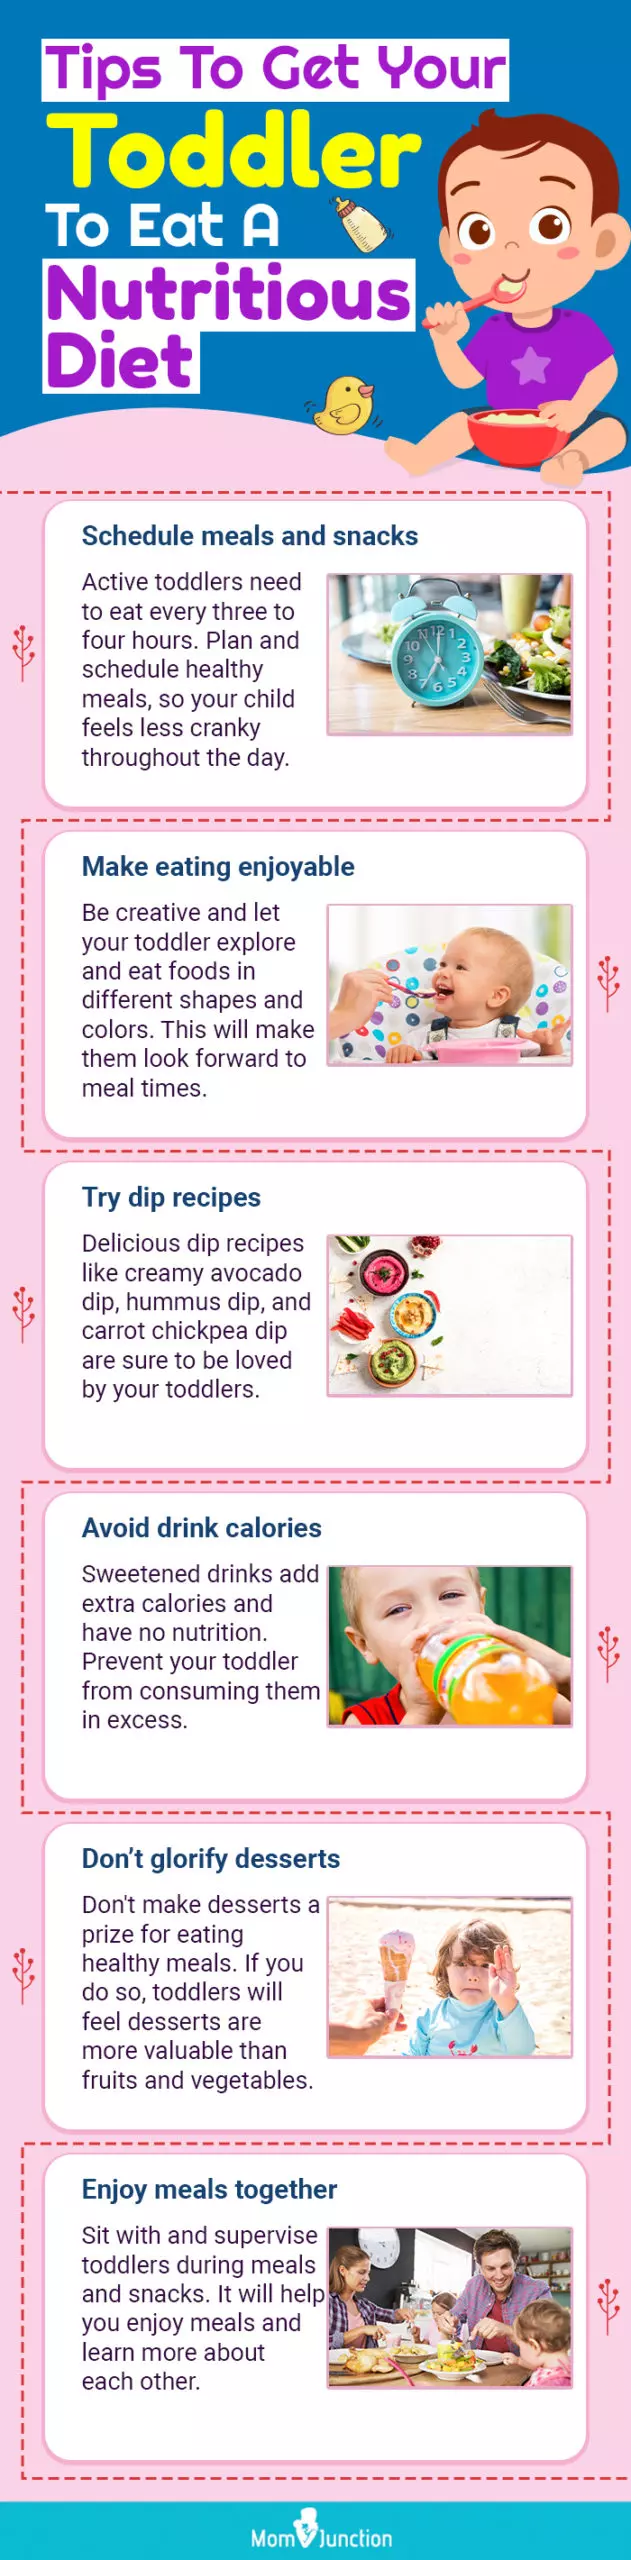 tips to get your toddler to eat a nutritious diet (infographic)